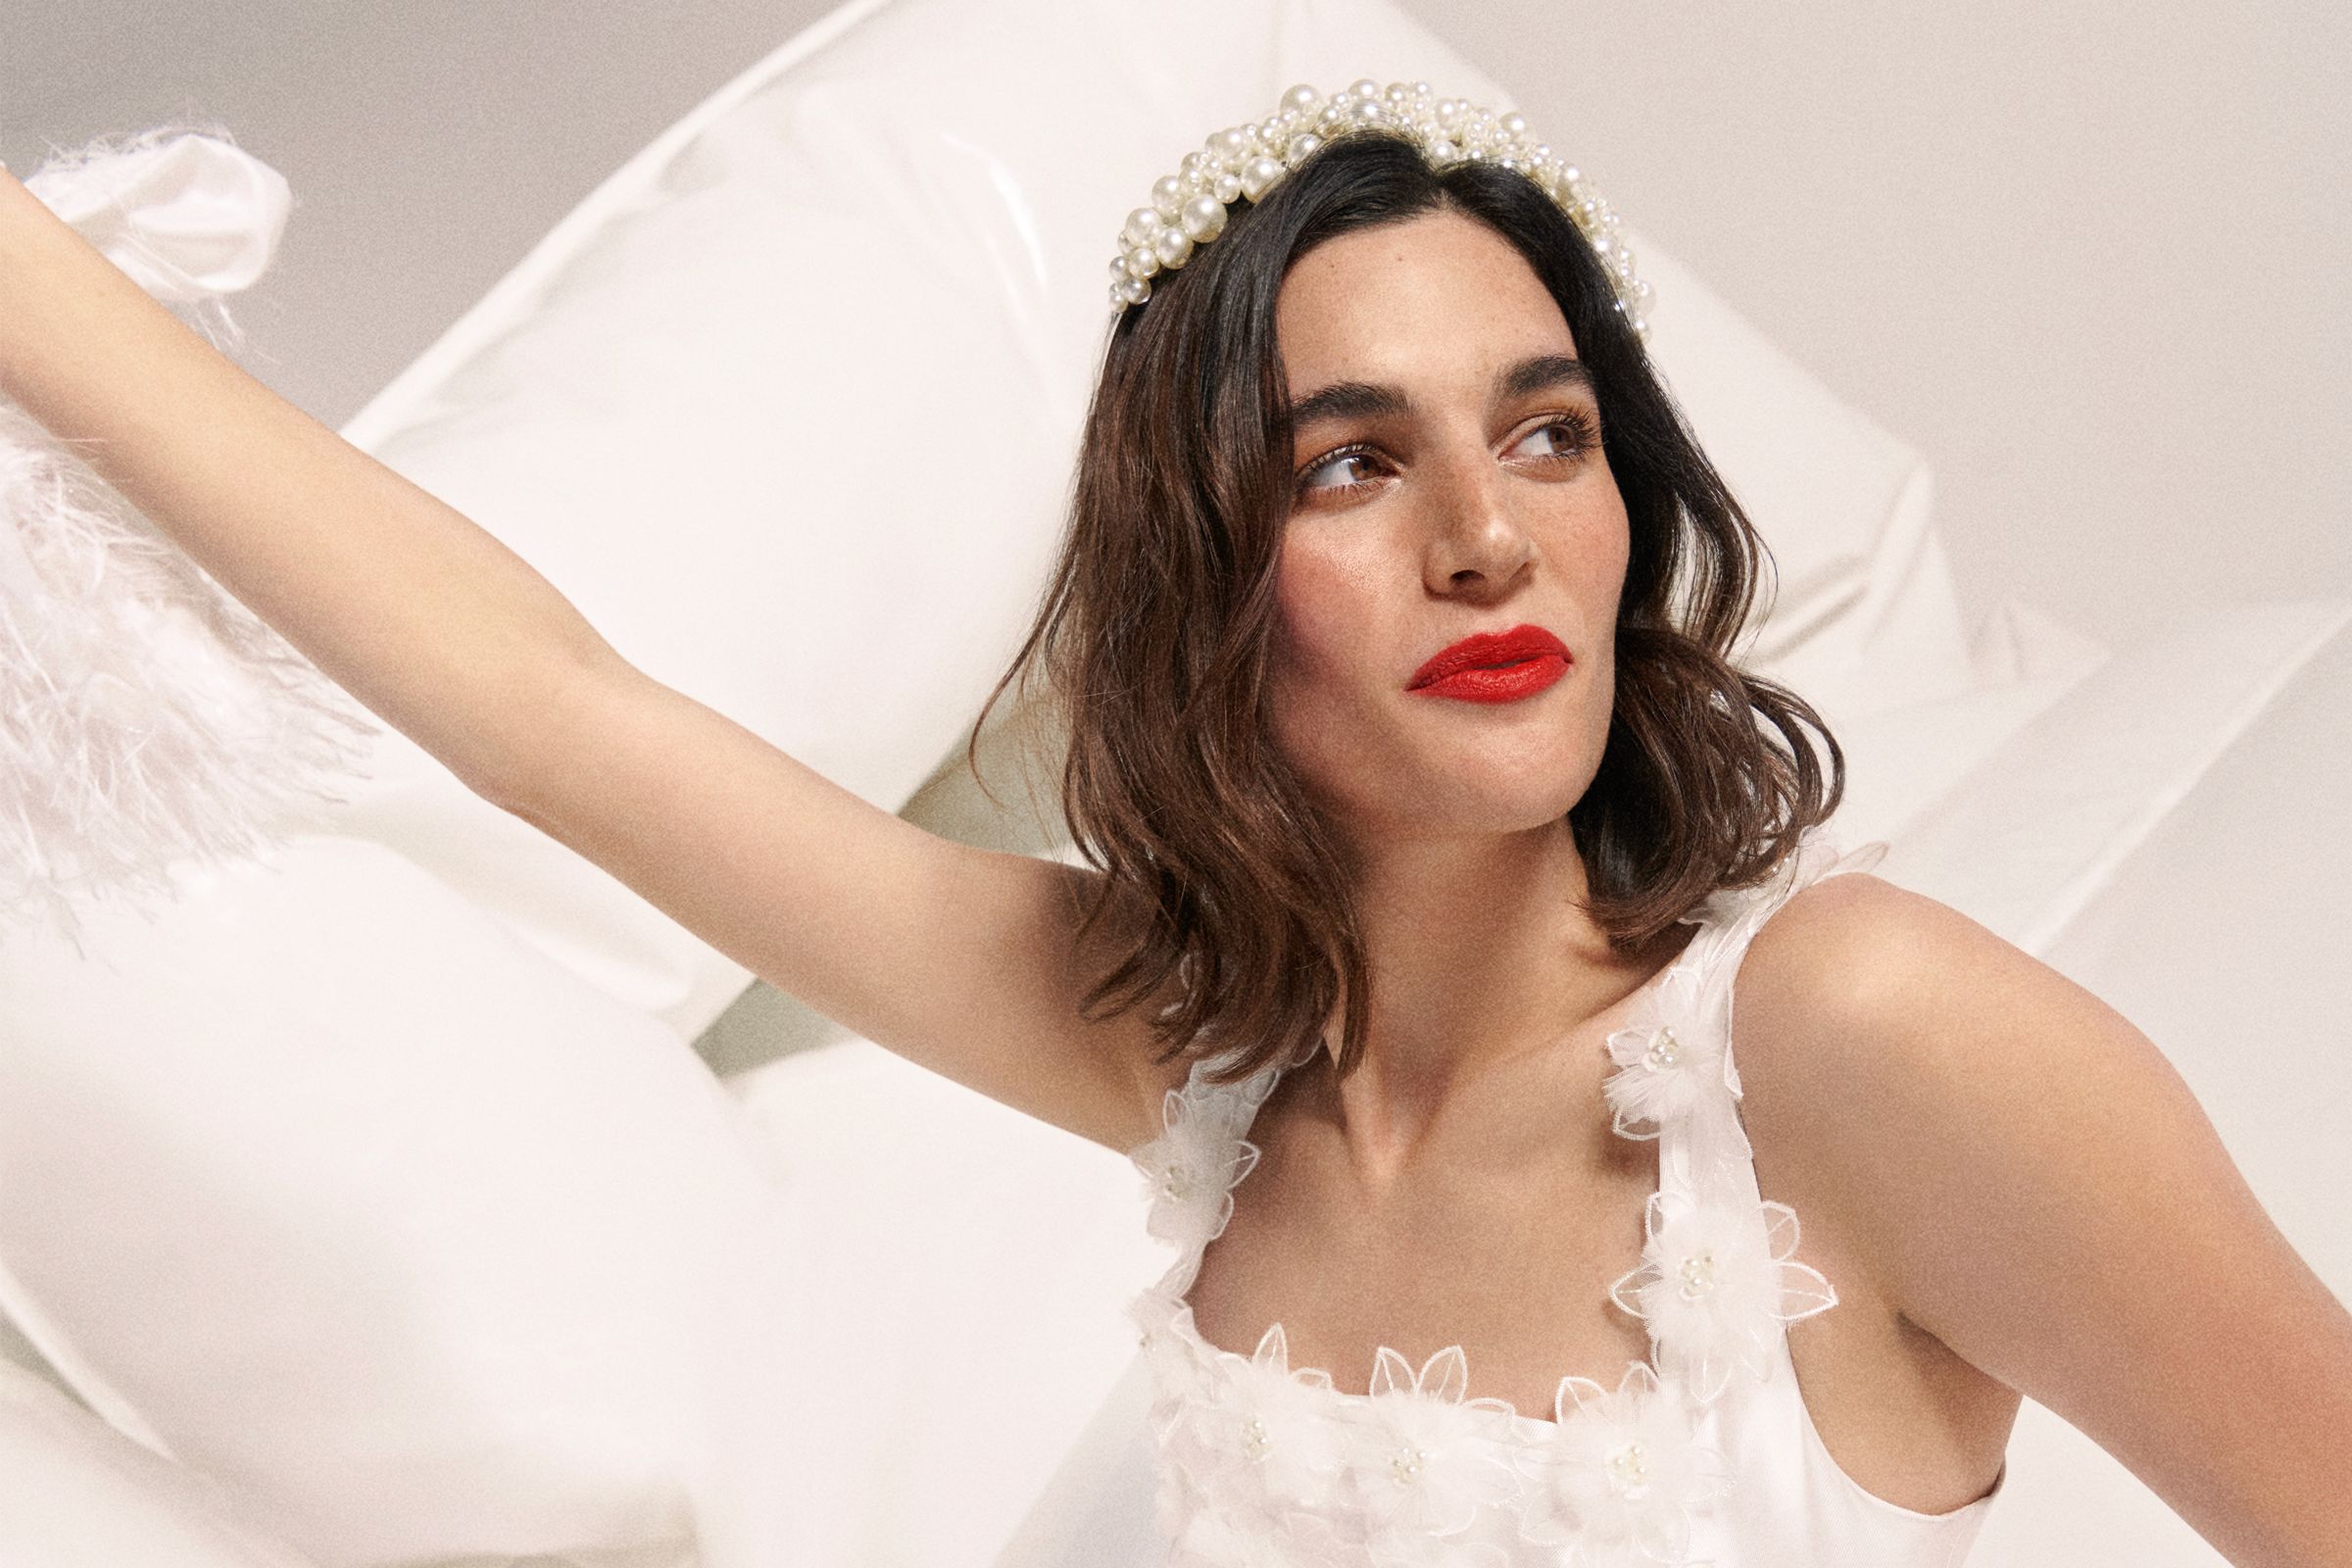 Image of a wedding model with bold brows and red lipstick